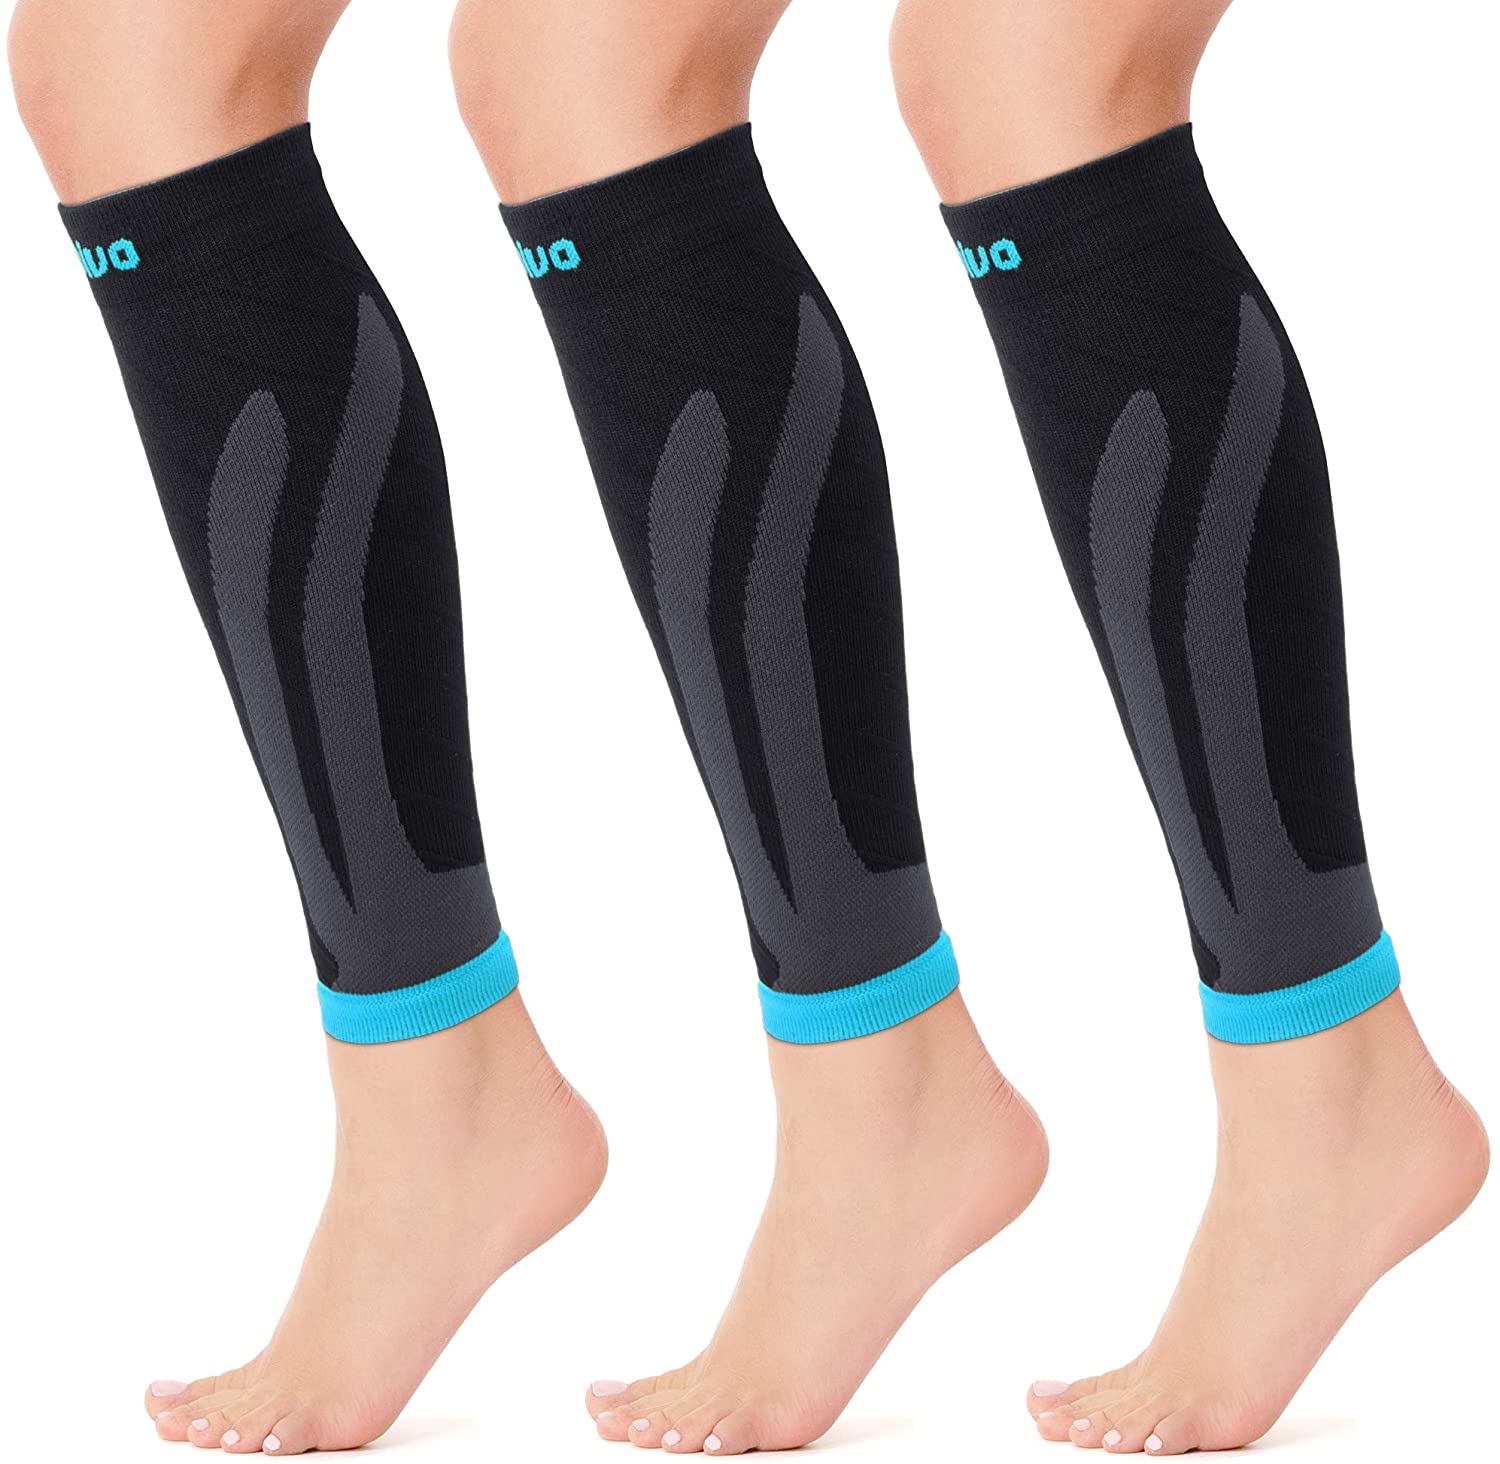  BeVisible Sports Calf Compression Sleeve - Leg Compression Socks  For Men and Women  Calf Sleeves for Shin Splints Running Cycling Travel  Nursing Maternity Varicose Veins Calf Pain Relief & Recovery 